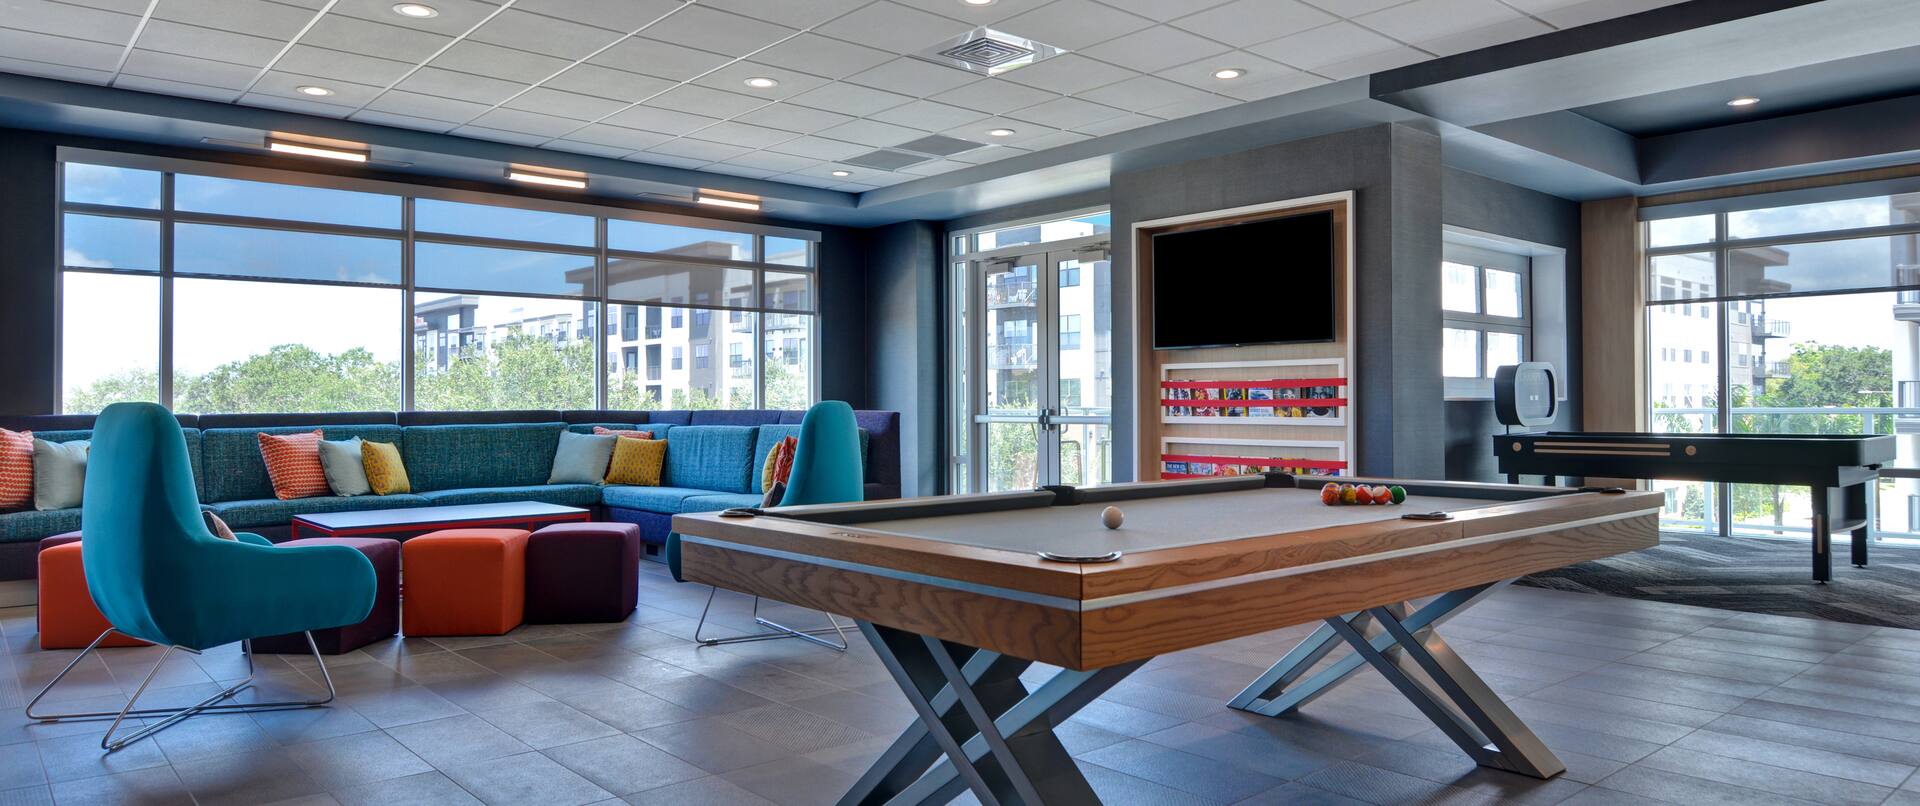 lobby lounge area with pool table and television